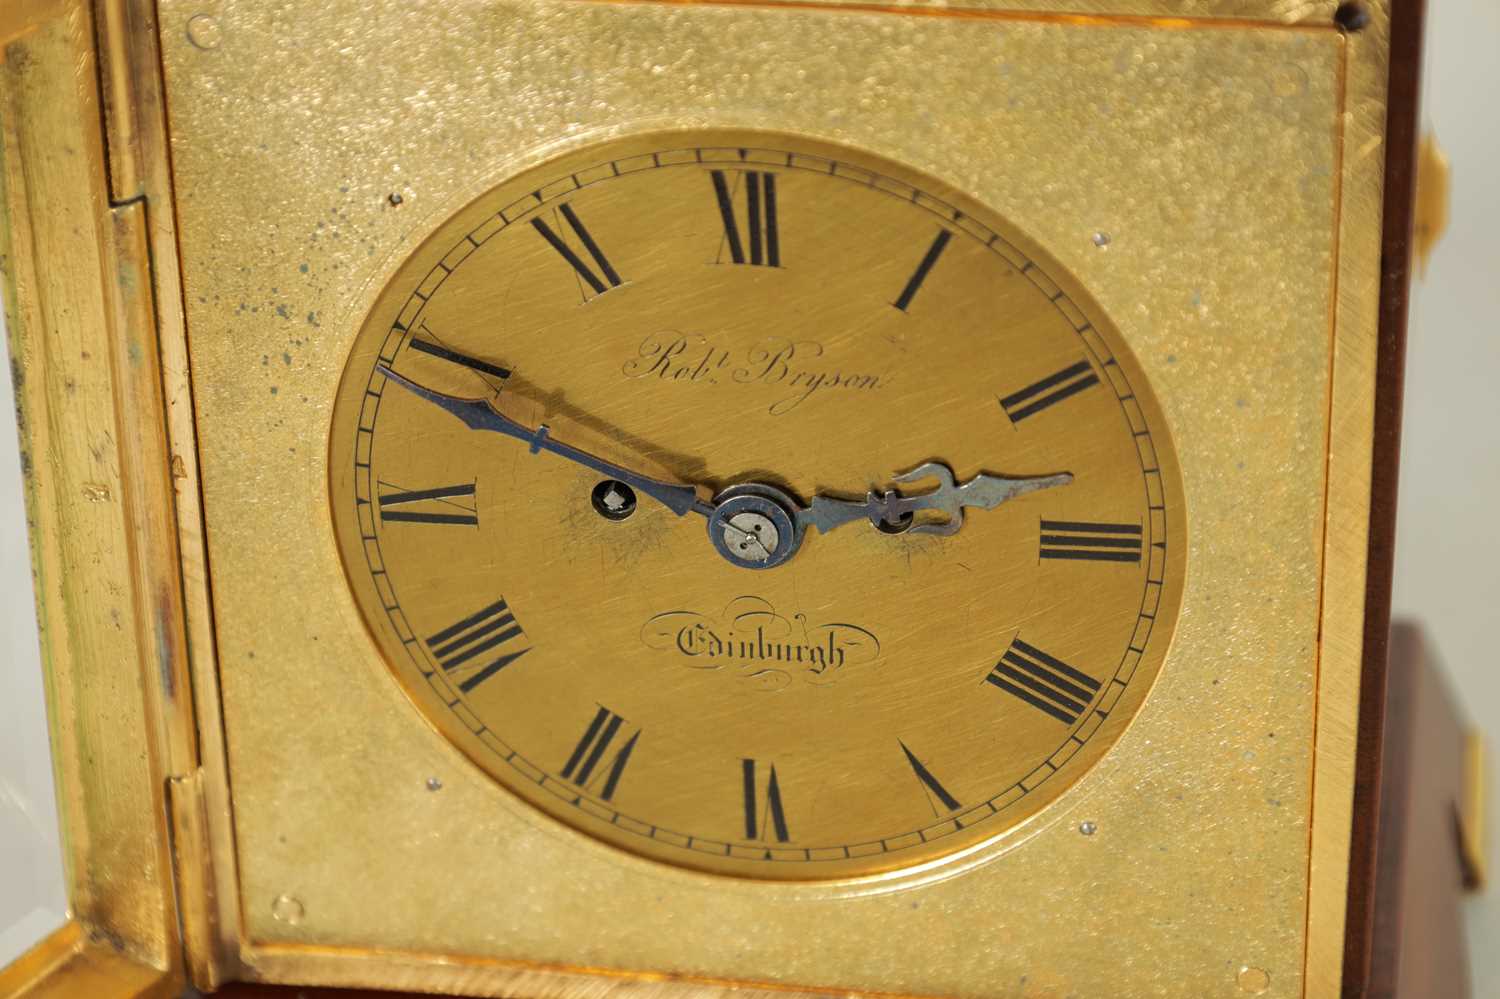 ROBERT BRYSON, EDINBURGH. A LATE 19TH CENTURY DOUBLE FUSEE CARRIAGE TYPE MANTEL CLOCK - Image 4 of 11